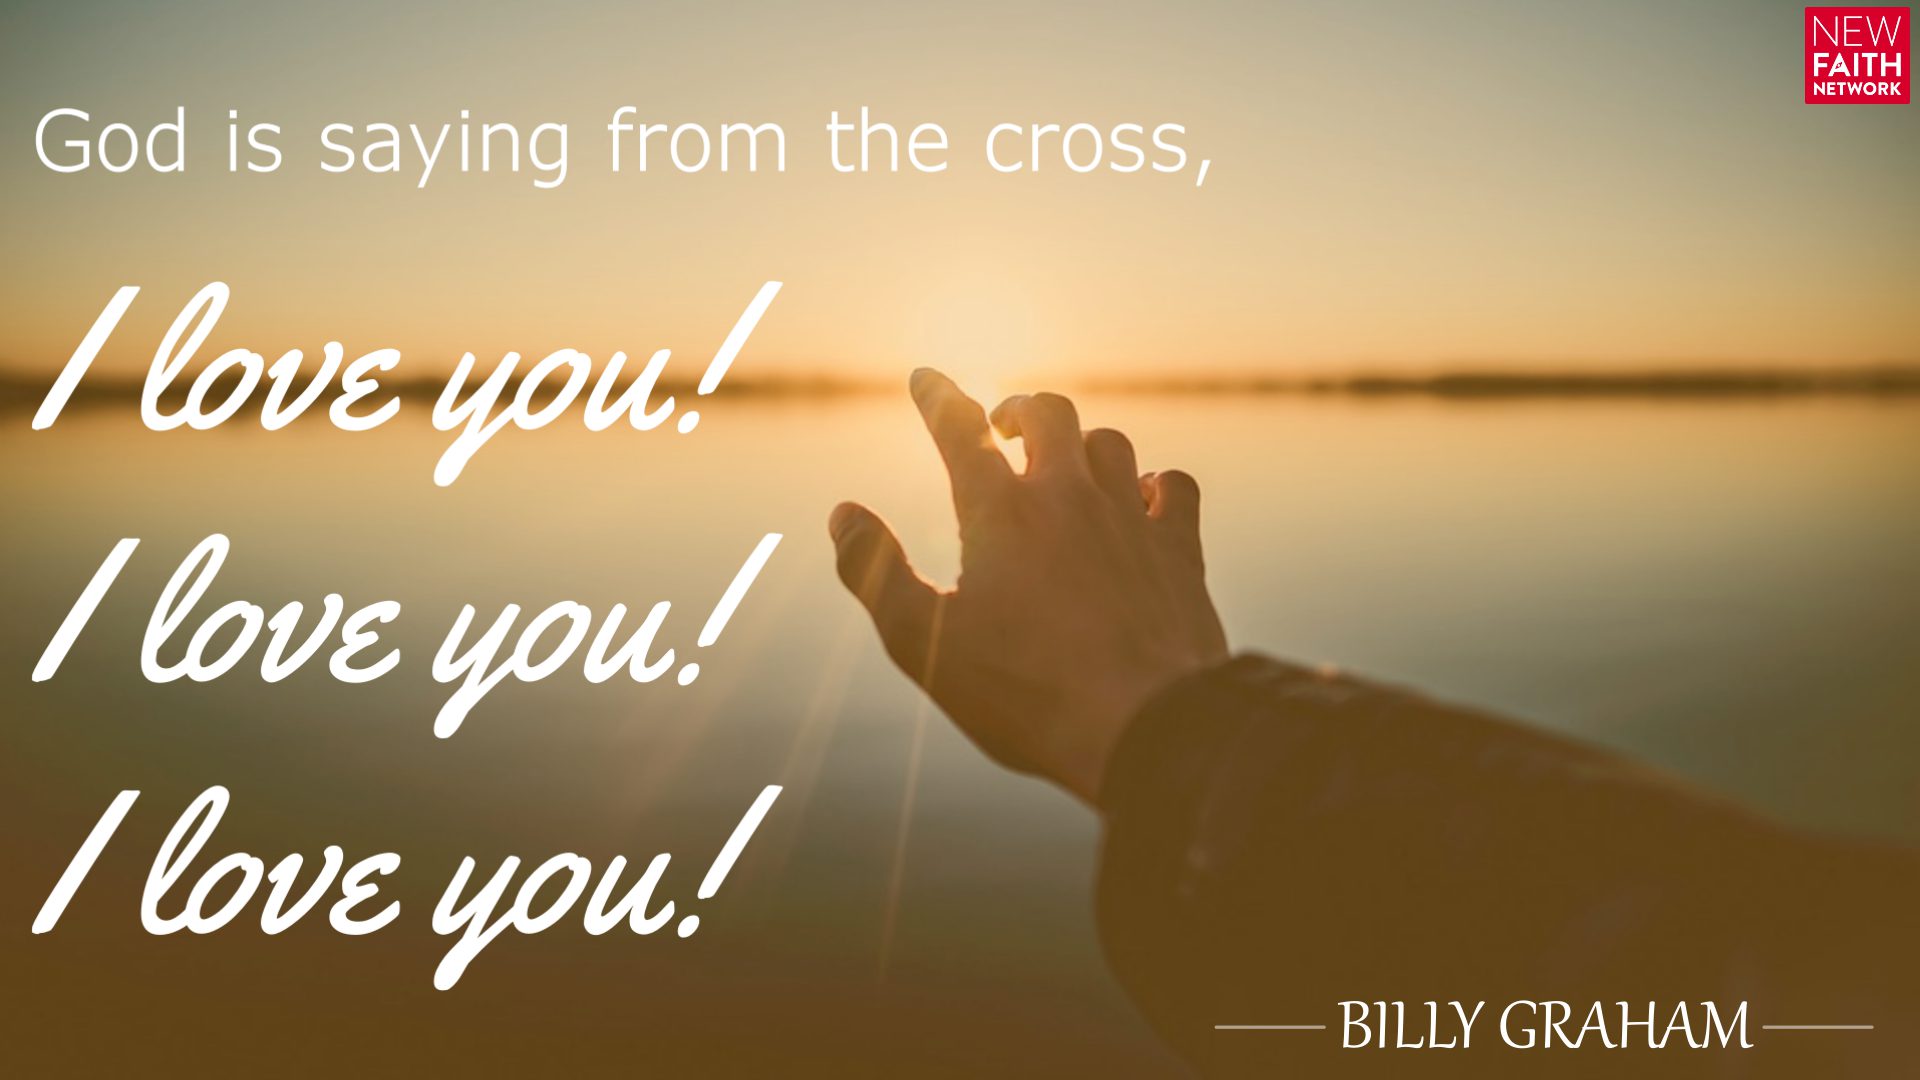 God is saying from the cross, ‘I love you! I love you! I love you!'